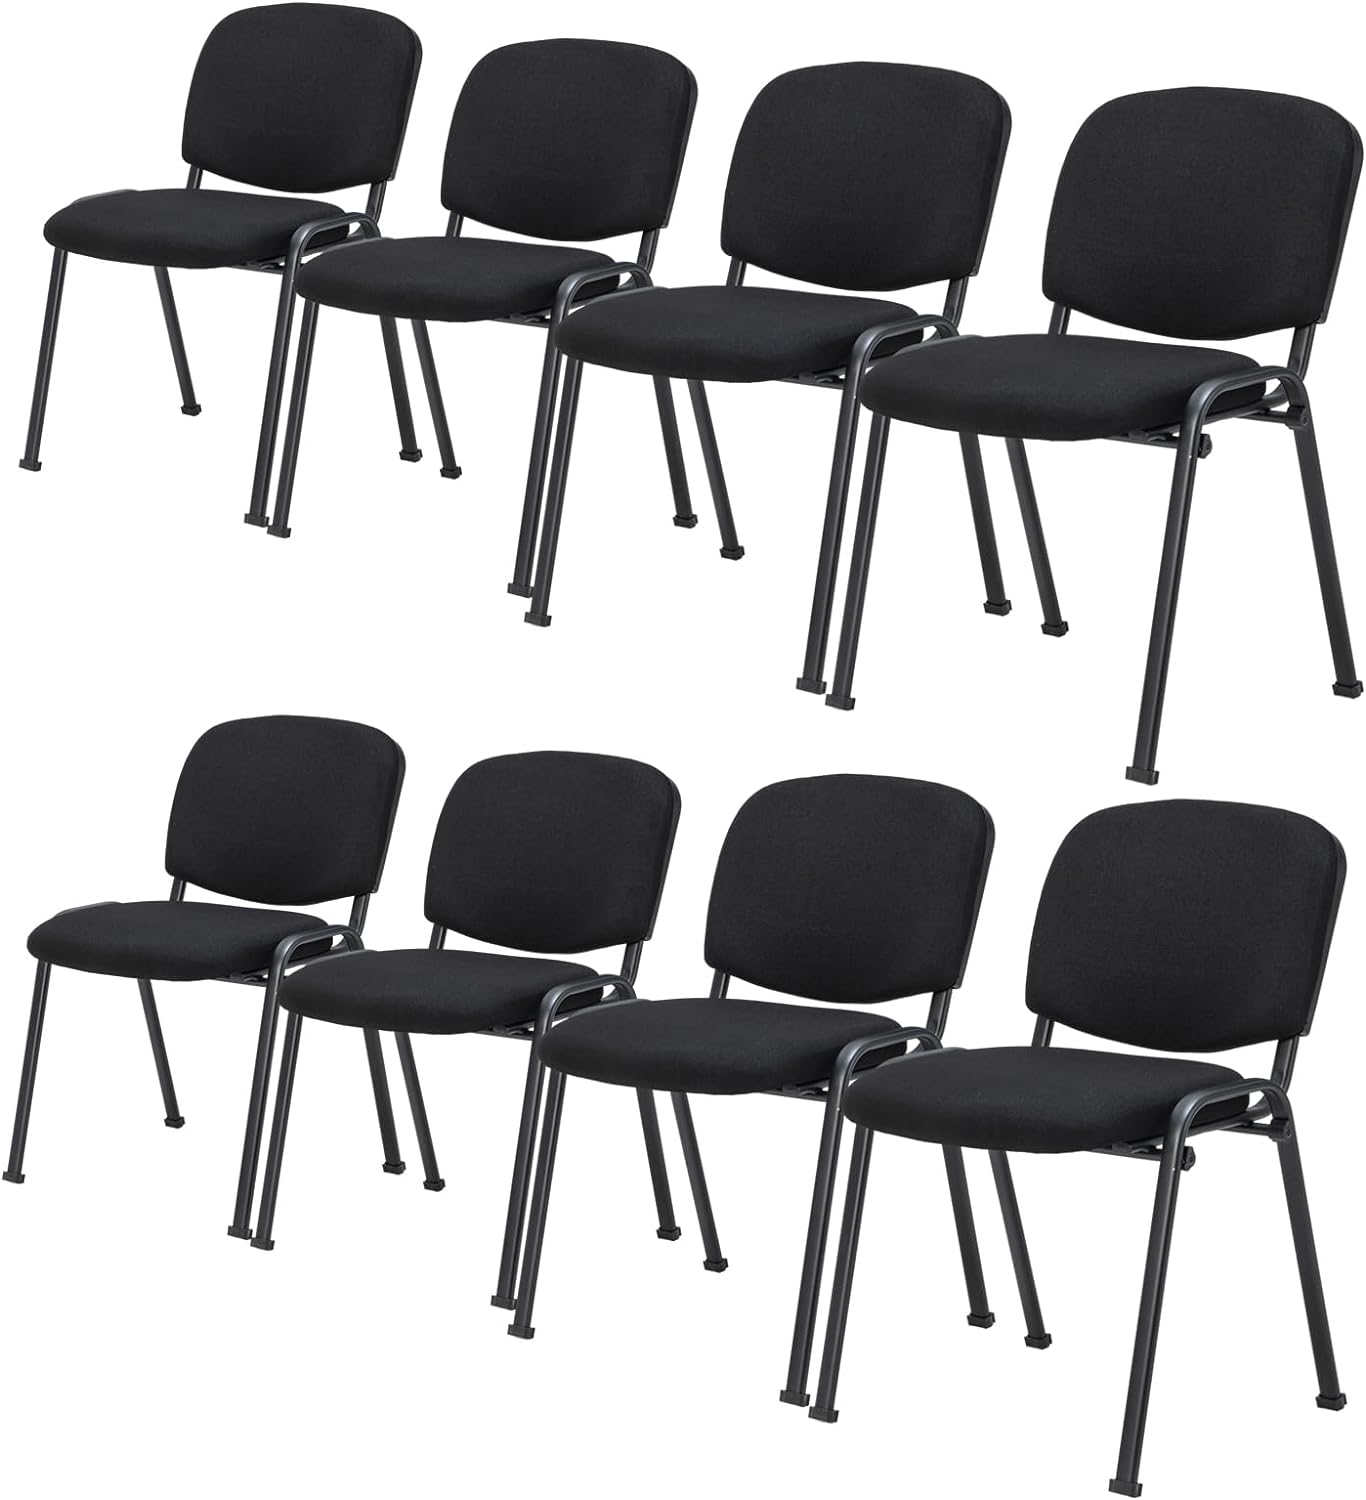 Giantex 5-Pack / 10-Pack Conference Chair Set - Stackable Guest Chair with Metal Frame